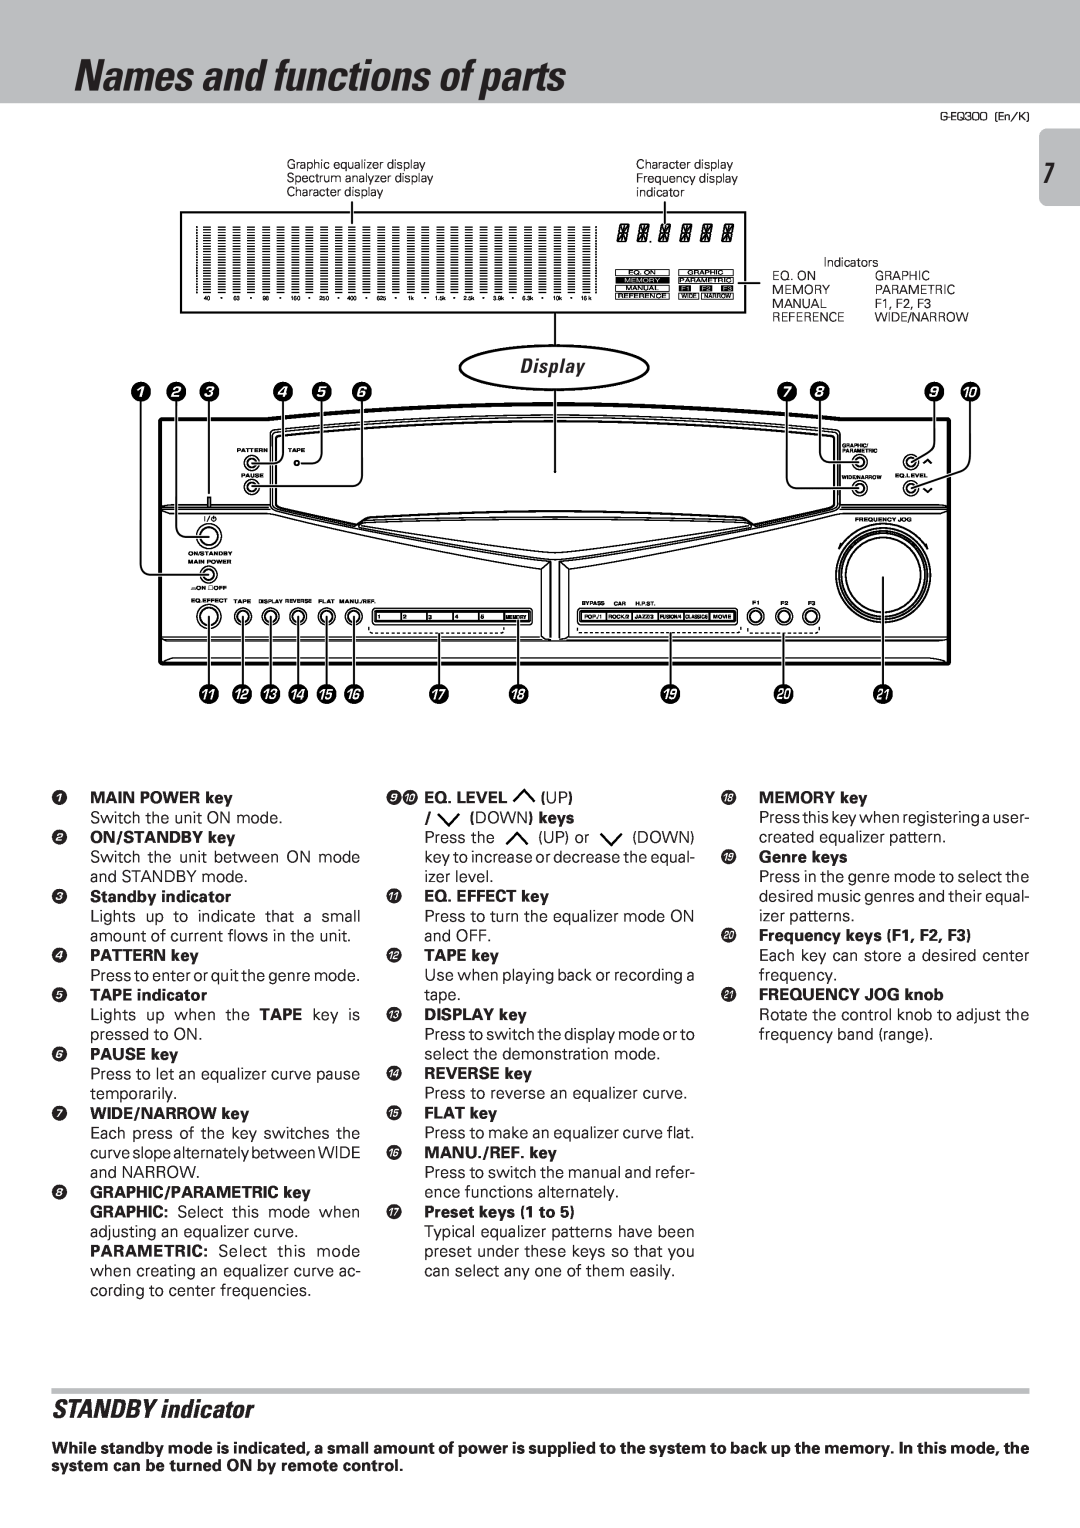 Kenwood G-EQ300 Names and functions of parts, STANDBY indicator, Display, Standby indicator, PATTERN key, TAPE indicator 